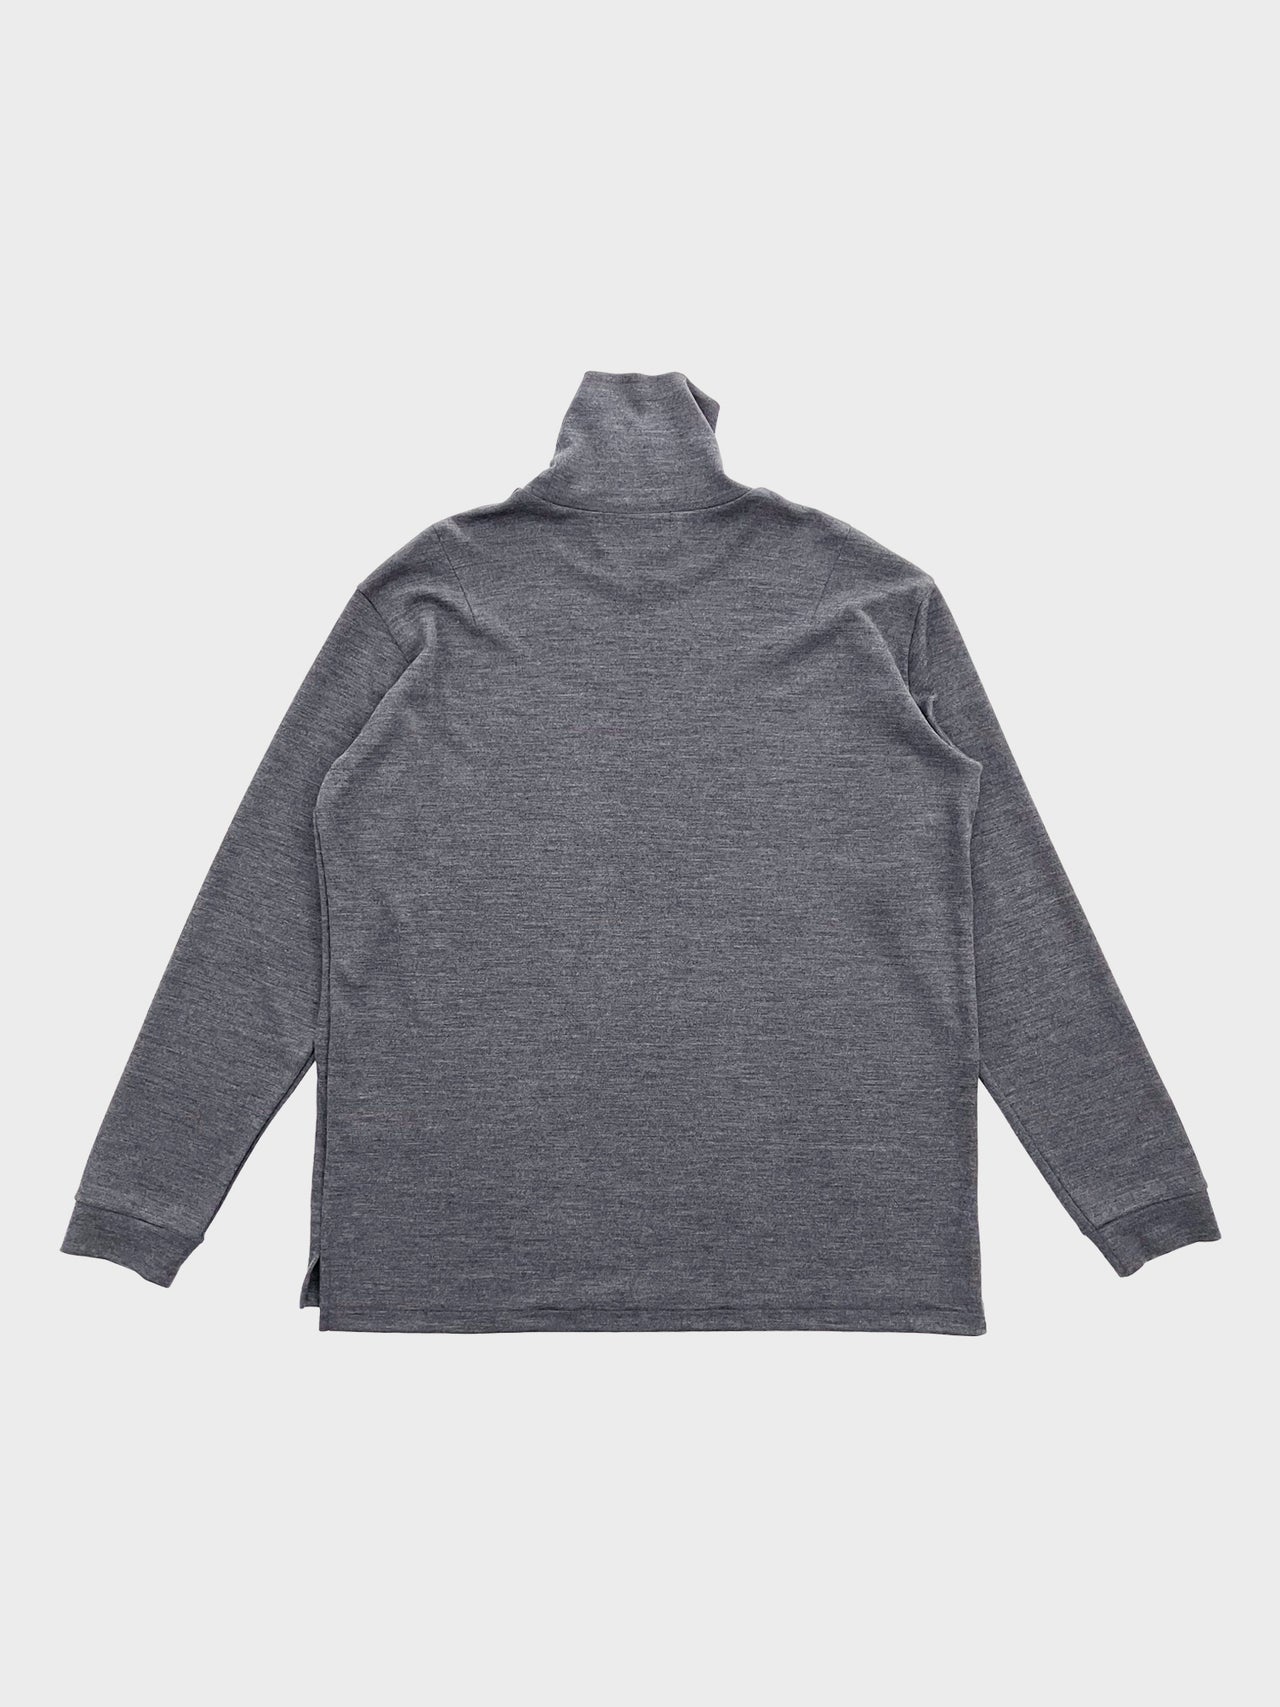 WEWILL /  TURTLE NECK T-SHIRT (GRAY)